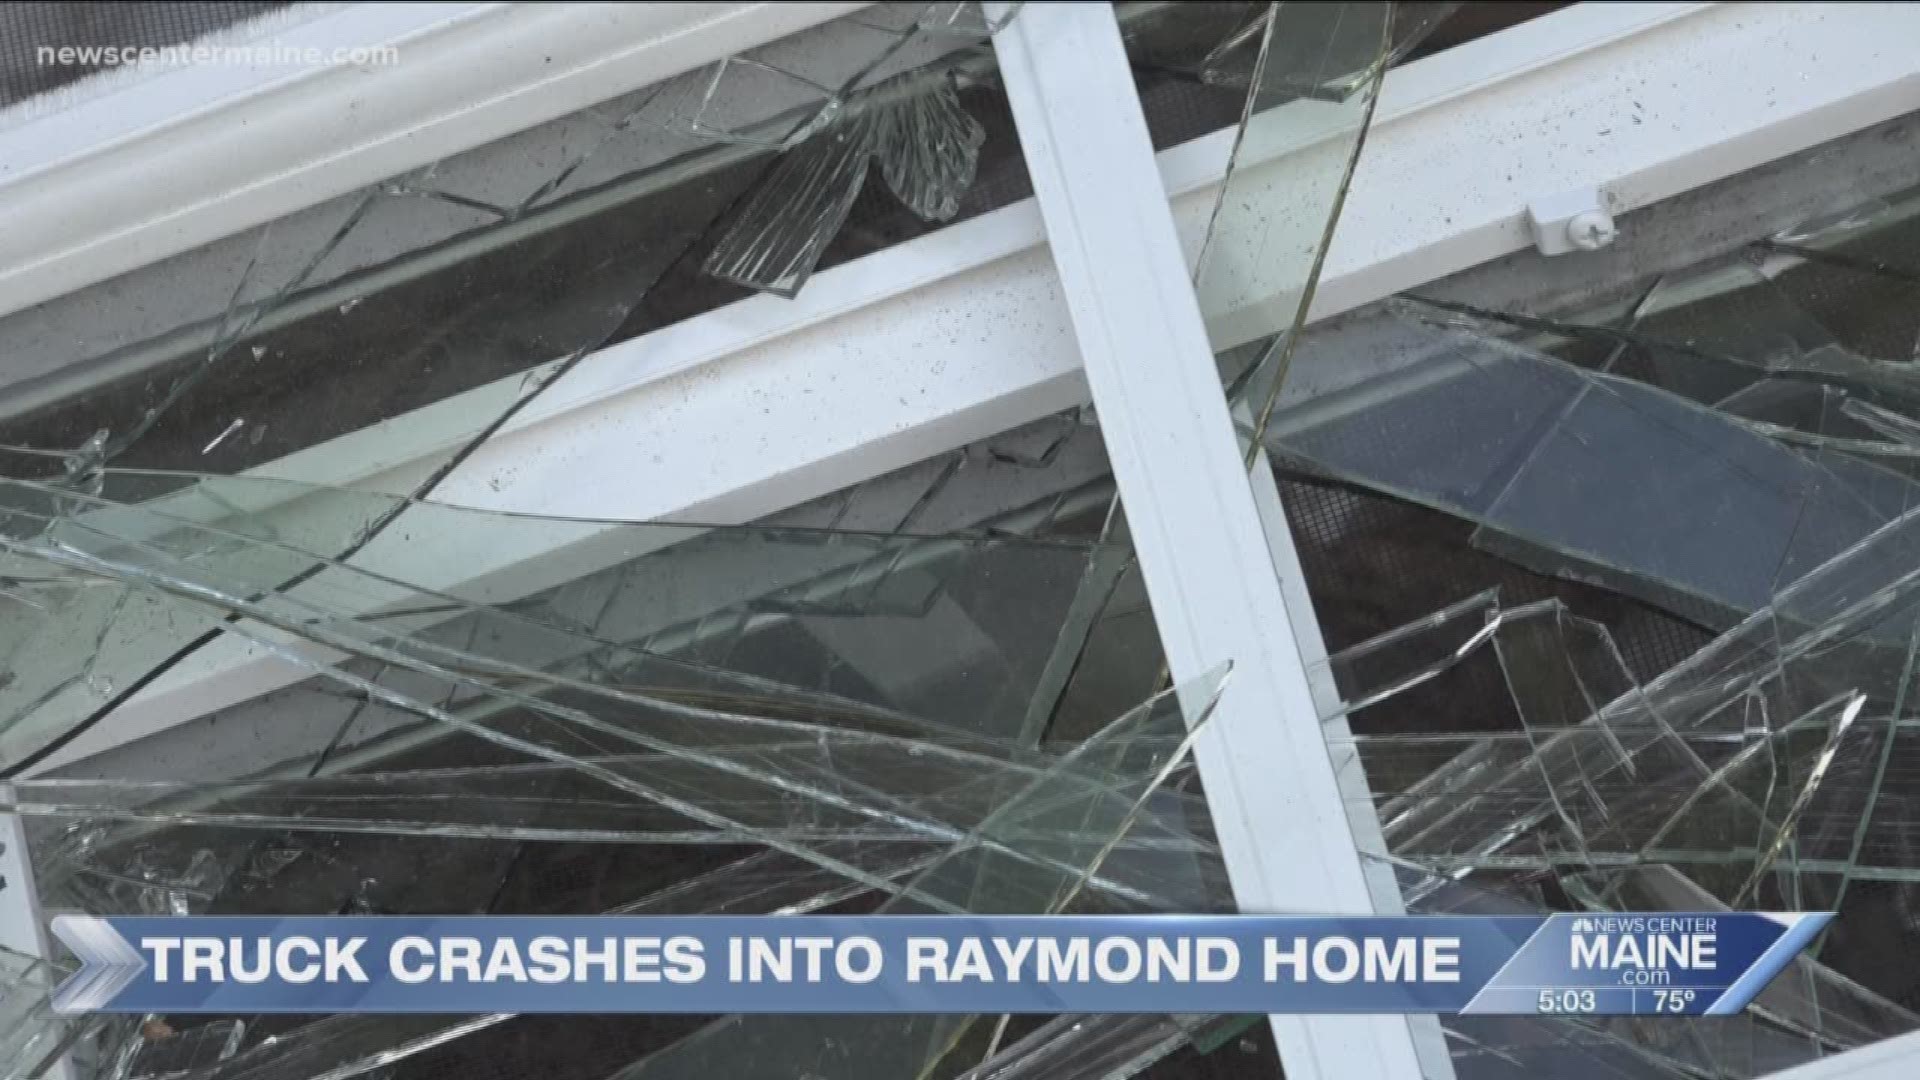 Truck crashes into home in Raymond